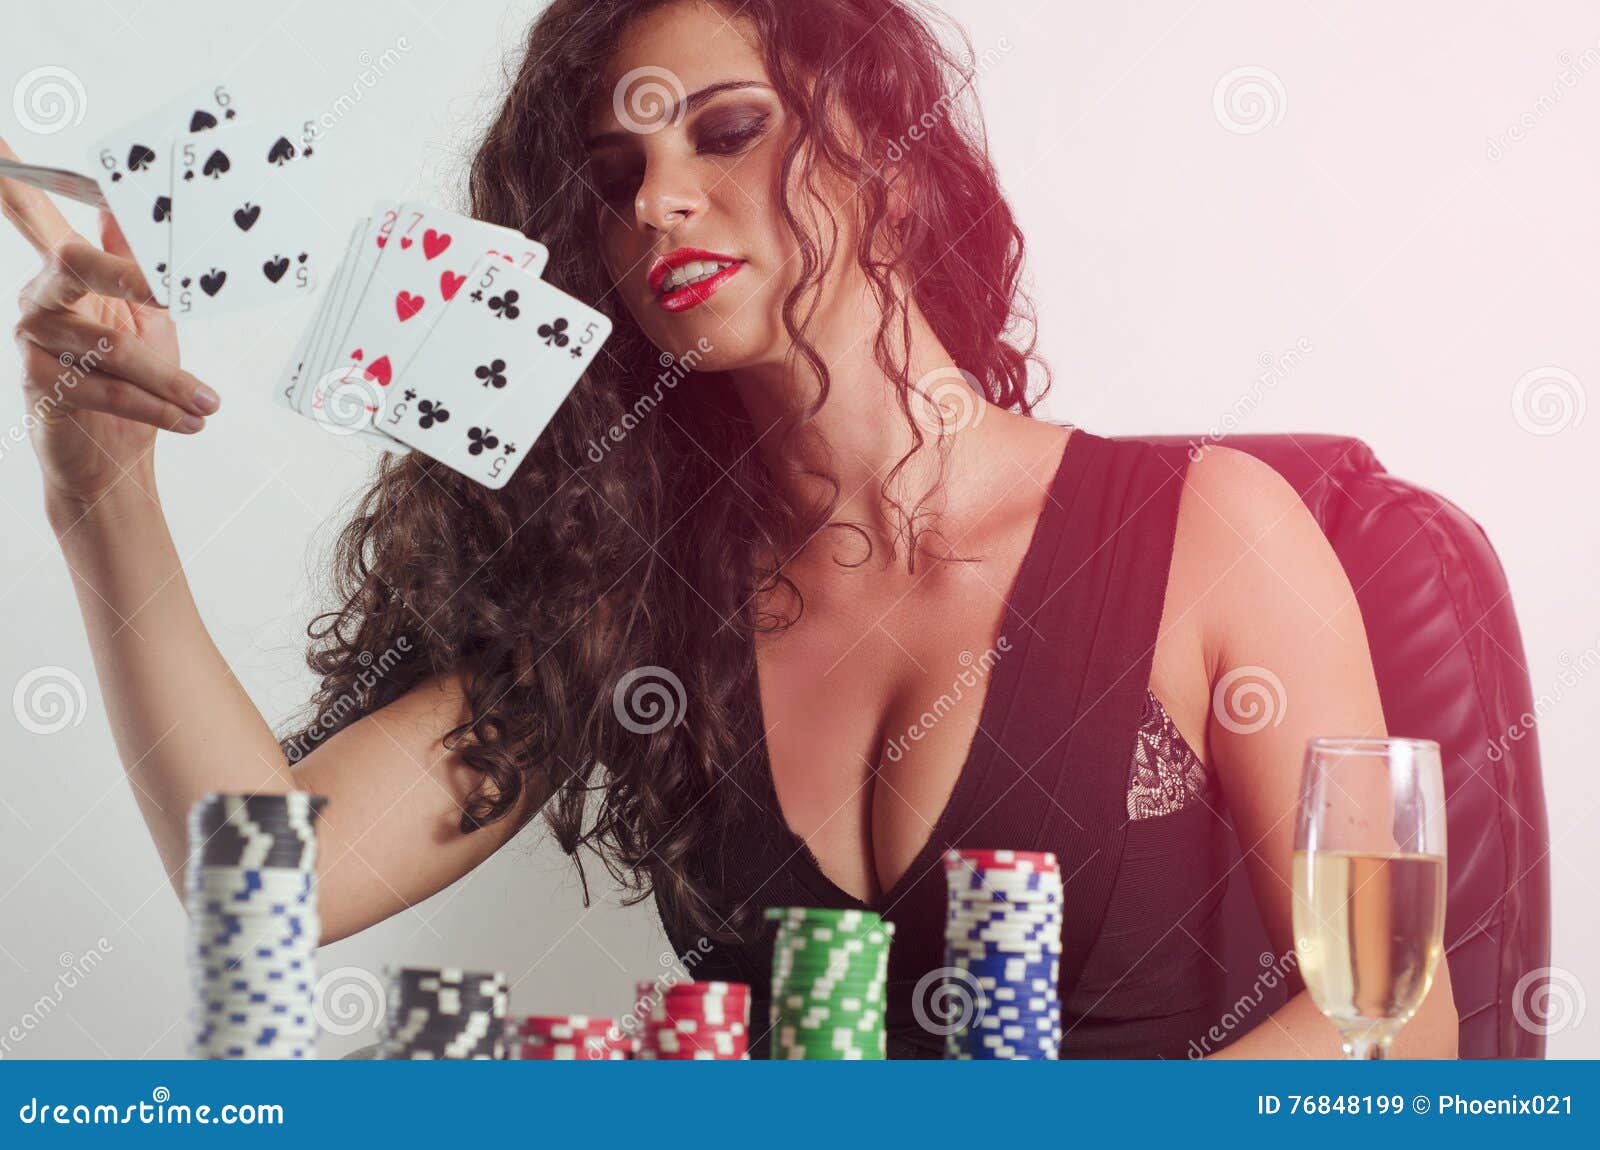 Formation Openly Kilometers Gorgeous Poker Girl Throwing Cards in Air Stock Image - Image of effects,  brunette: 76848199